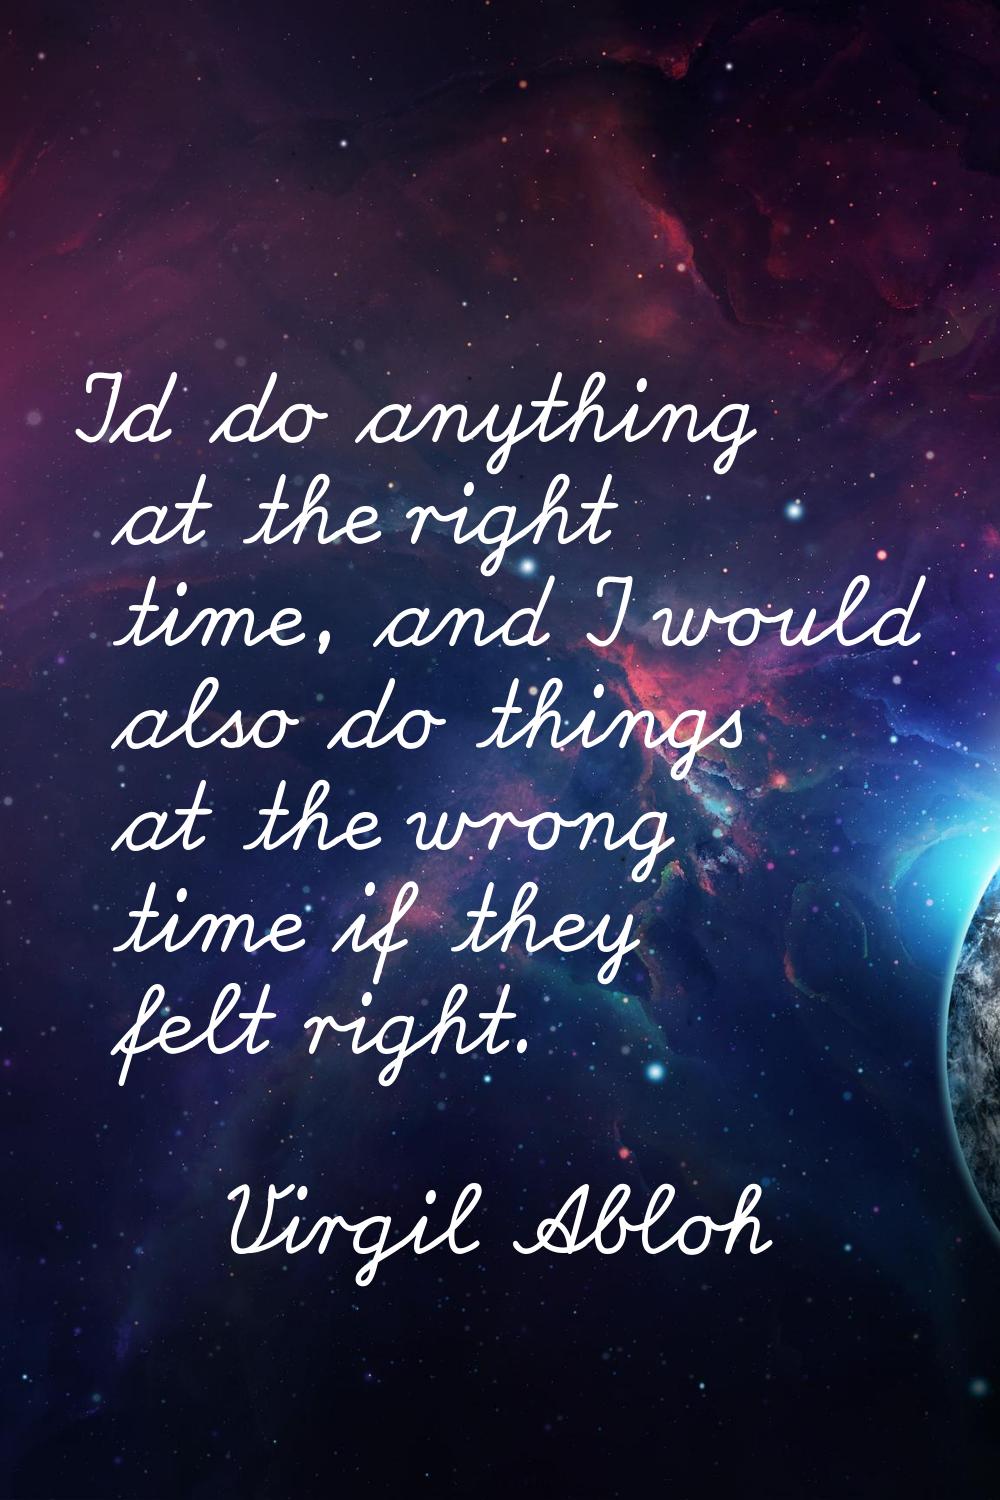 I'd do anything at the right time, and I would also do things at the wrong time if they felt right.